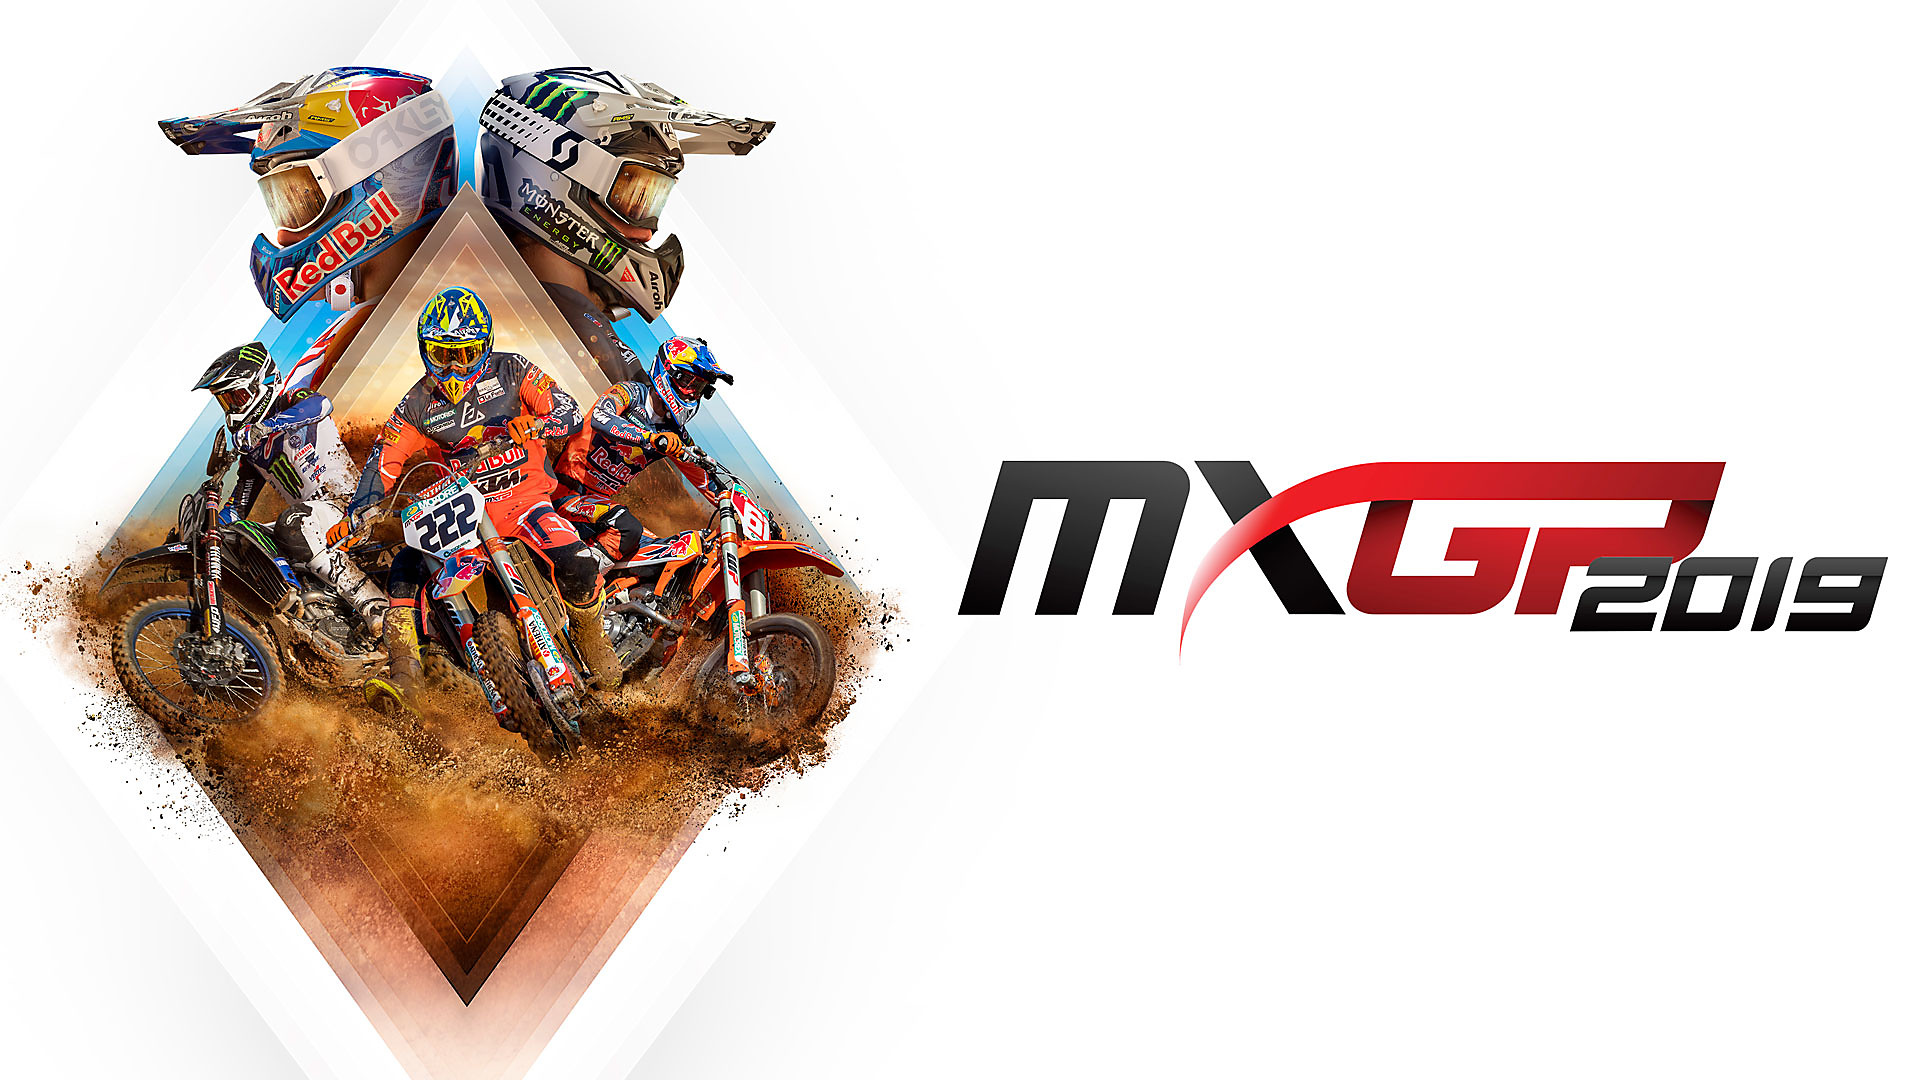 MXGP PRO [ENG|Multi6] (2018) PC | RePack By R.G. Freedom Latest Version